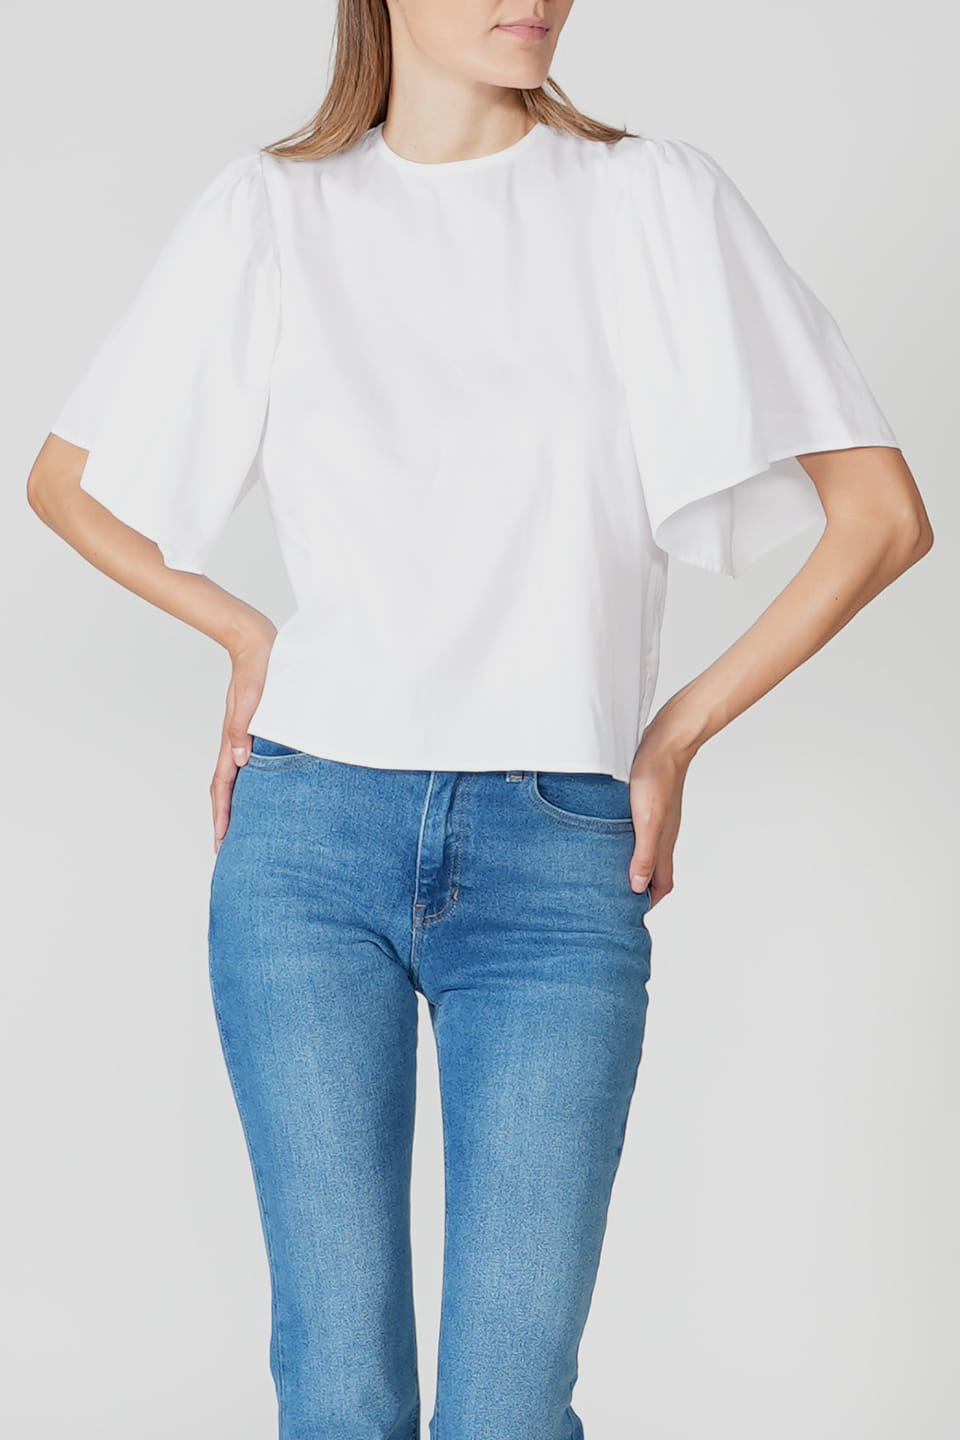 Thumbnail for Product gallery 1, Wide Sleeve T-Shirt White